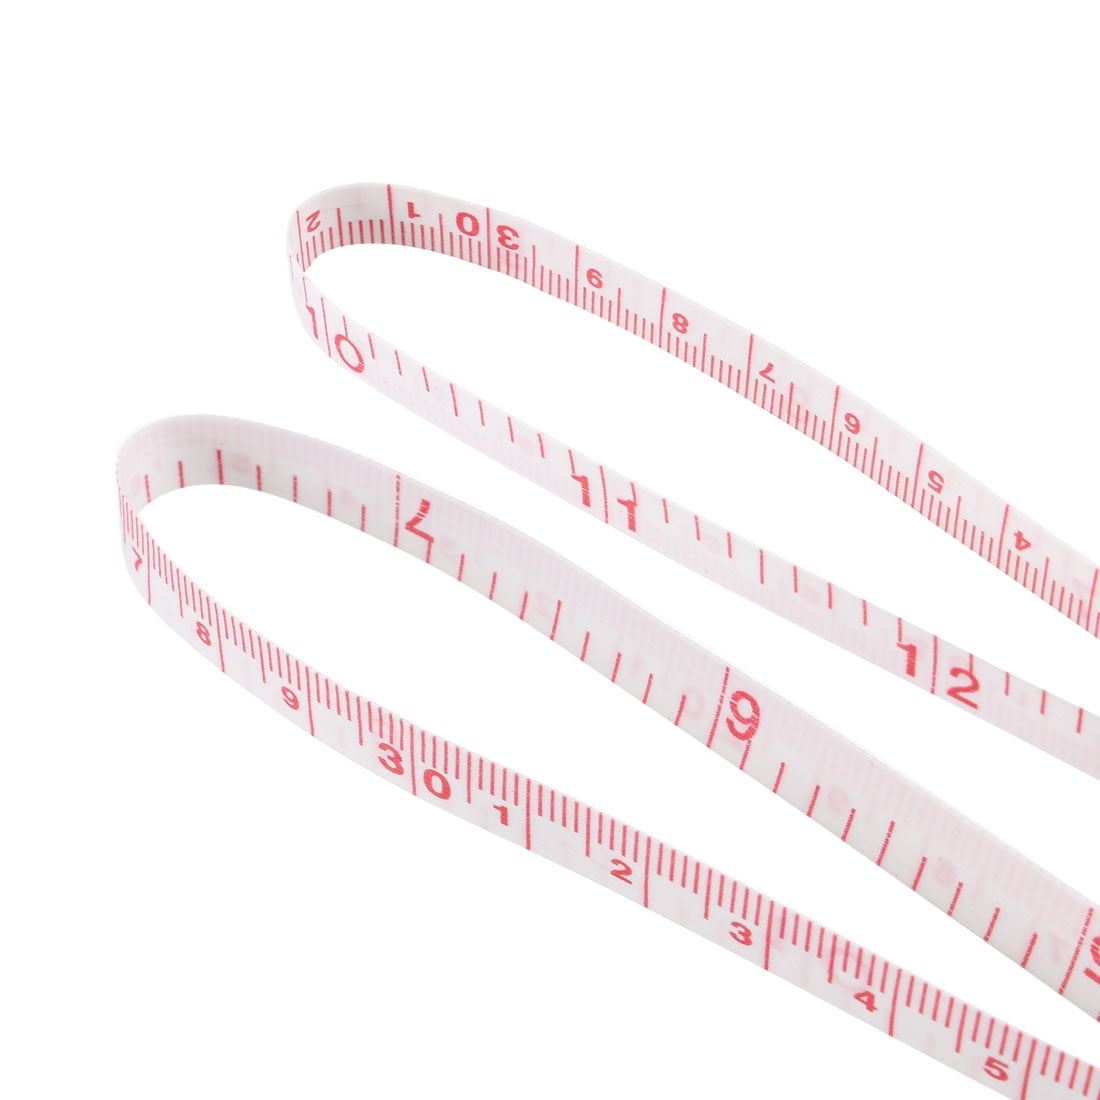 Tape Measure Measuring Tape for Body Sewing Tailor Fabric Cloth Weight Loss  Craft Supplies Soft Flexible Fiberglass Ruler Dual Scale Measurement Tape  (Pink, 60 INCH / 150 cm) price in Egypt,  Egypt